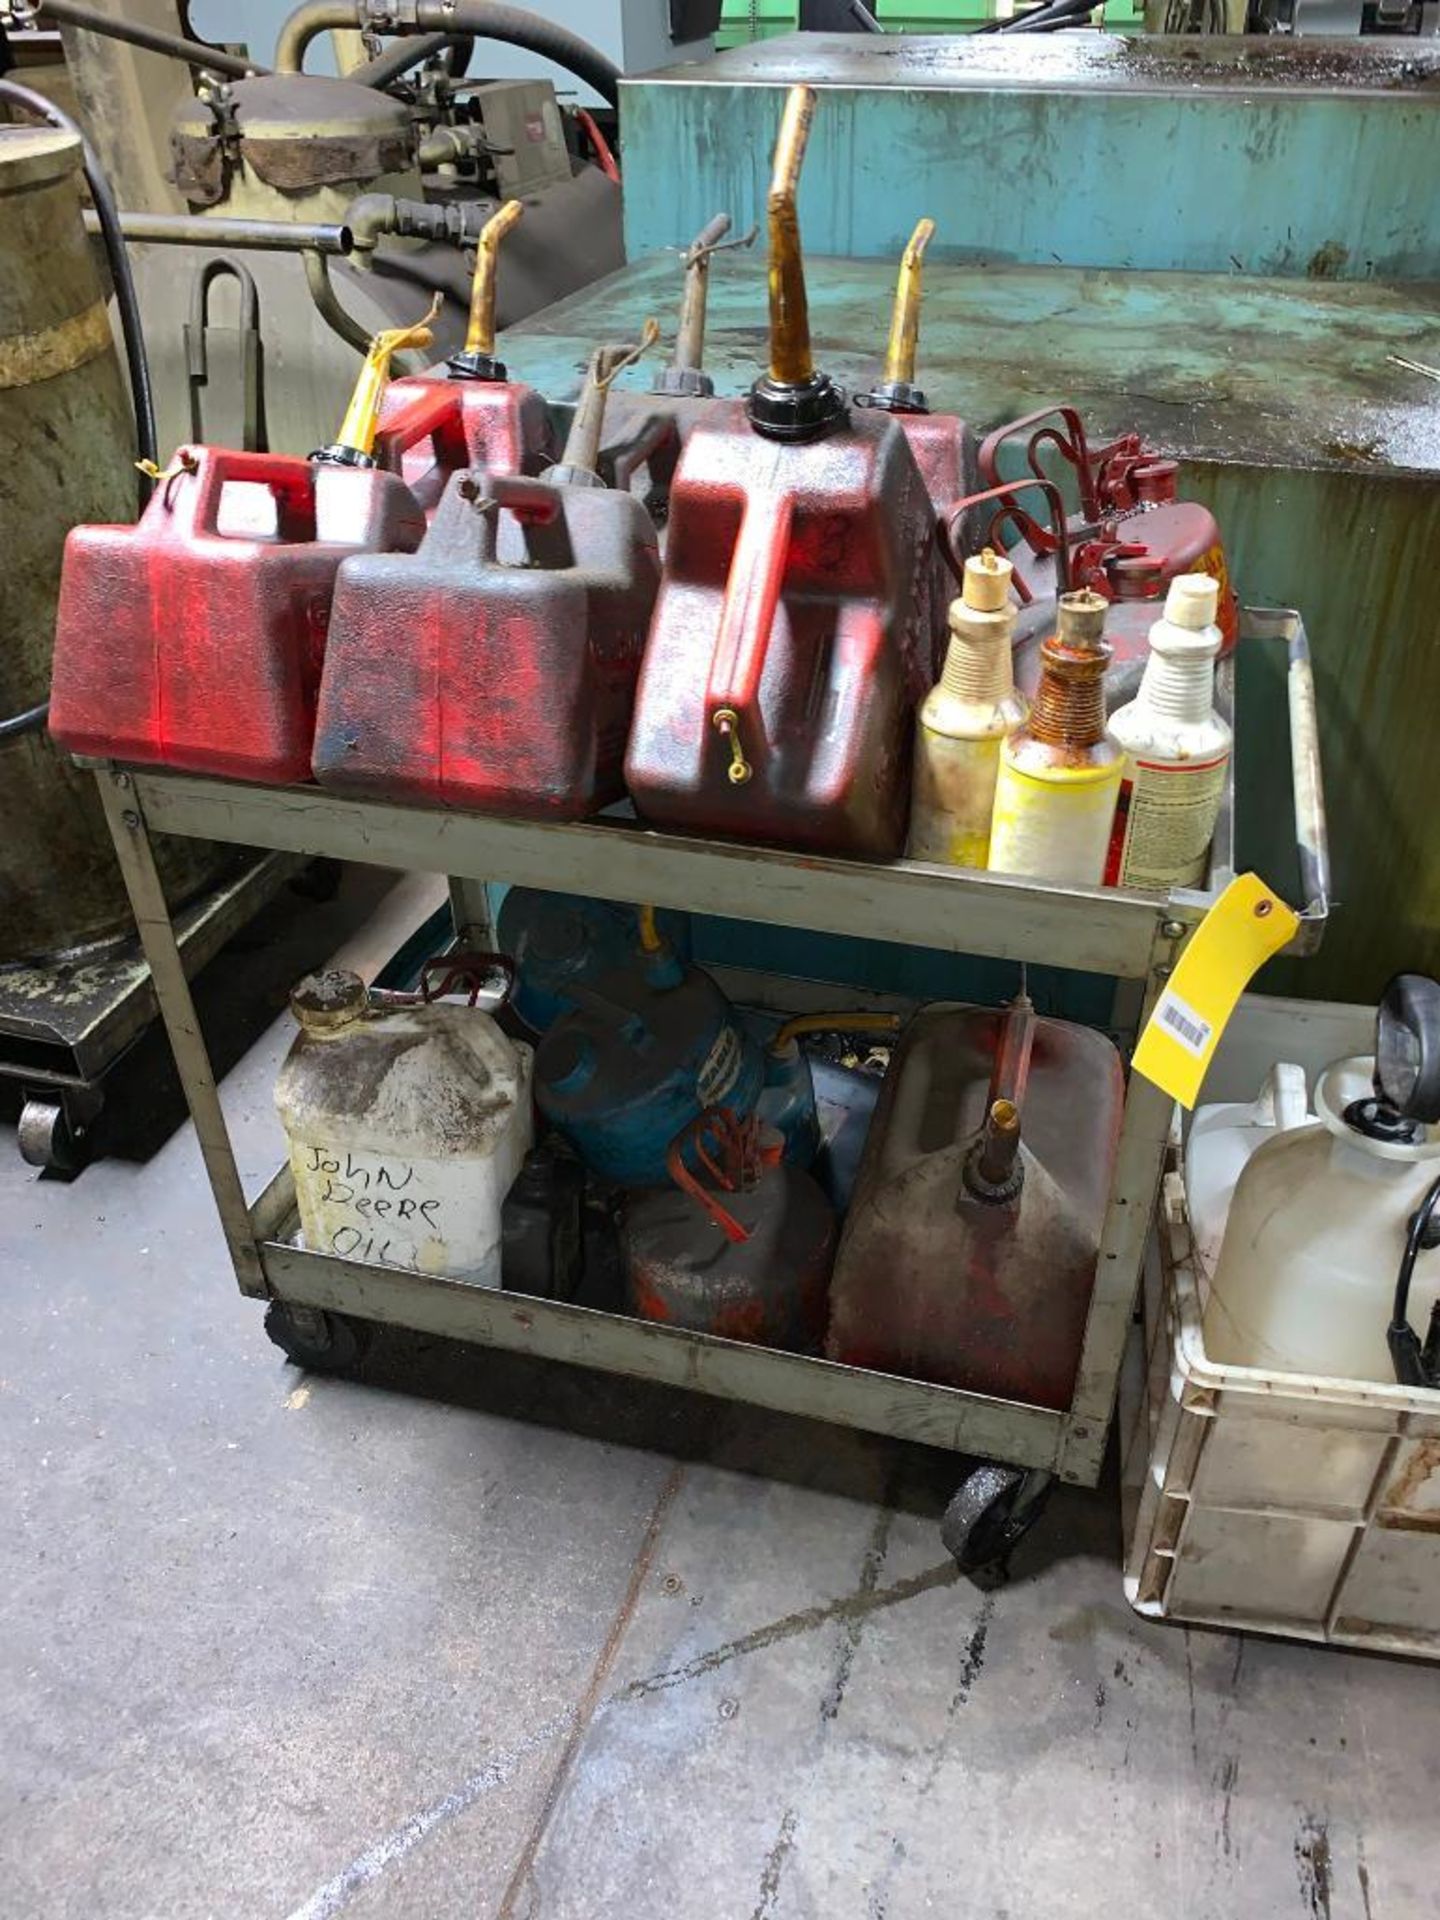 CART W/SAFETY CANS, MOP BUCKETS, SPRAYER, TOTE